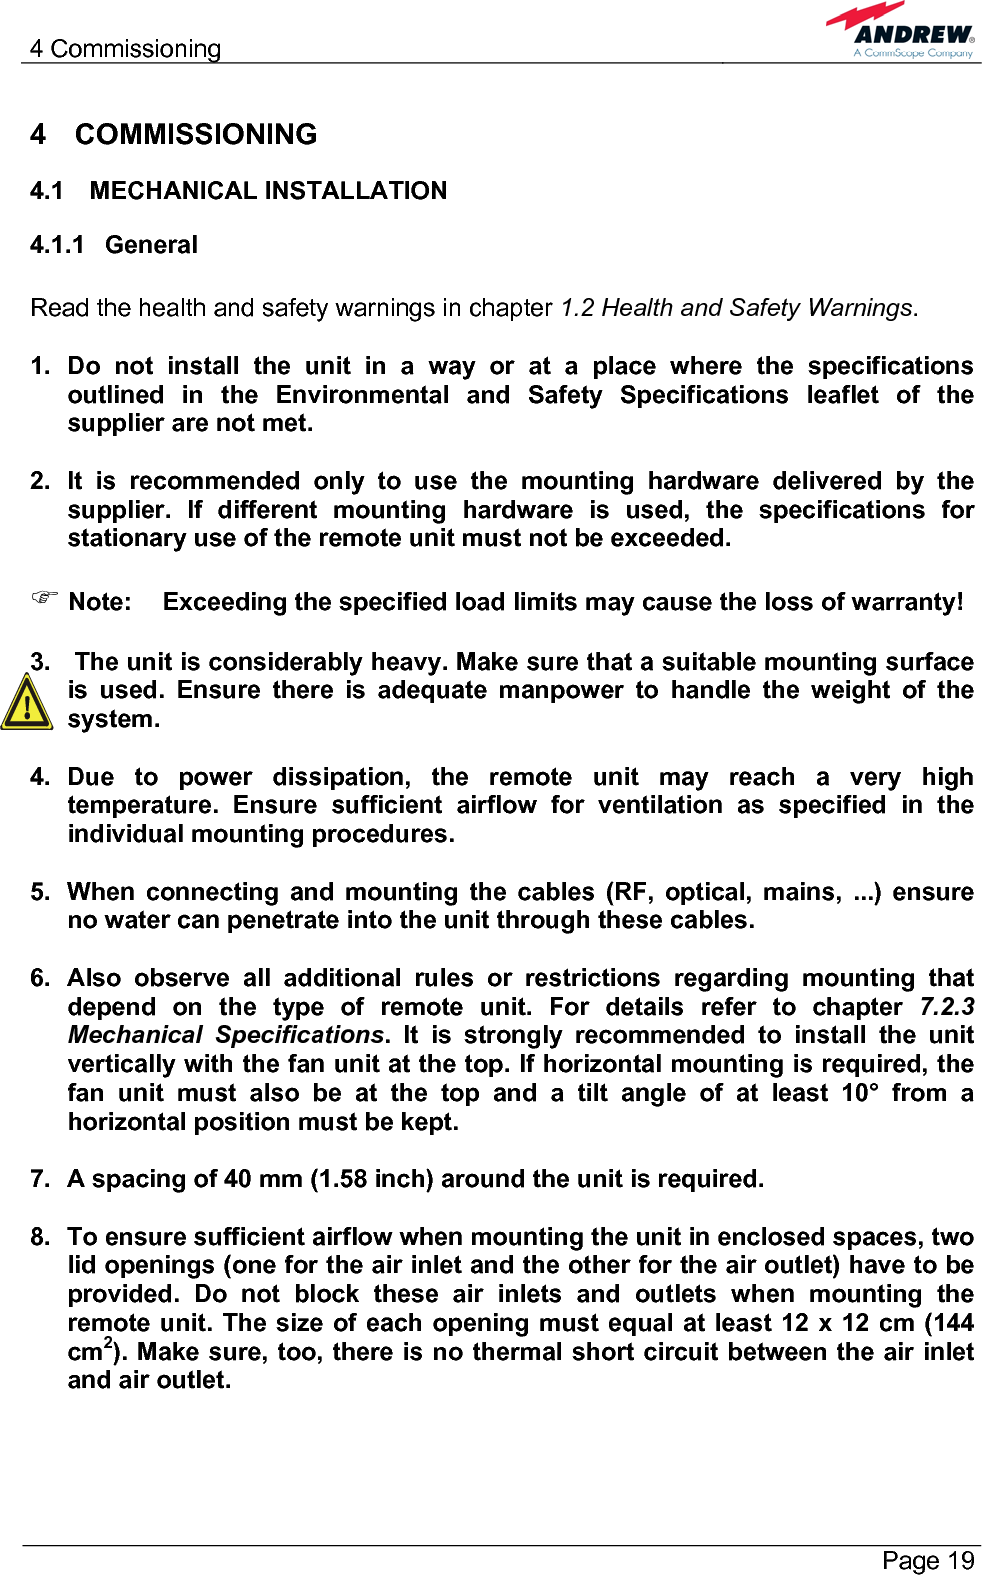 4 Commissioning       Page 19 4 COMMISSIONING 4.1 MECHANICAL INSTALLATION 4.1.1 General  Read the health and safety warnings in chapter 1.2 Health and Safety Warnings.  1. Do not install the unit in a way or at a place where the specifications outlined in the Environmental and Safety Specifications leaflet of the supplier are not met.  2.  It is recommended only to use the mounting hardware delivered by the supplier. If different mounting hardware is used, the specifications for stationary use of the remote unit must not be exceeded.  ) Note:  Exceeding the specified load limits may cause the loss of warranty!  3.   The unit is considerably heavy. Make sure that a suitable mounting surface is used. Ensure there is adequate manpower to handle the weight of the system.  4. Due to power dissipation, the remote unit may reach a very high temperature. Ensure sufficient airflow for ventilation as specified in the individual mounting procedures.  5.  When connecting and mounting the cables (RF, optical, mains, ...) ensure no water can penetrate into the unit through these cables.  6.  Also observe all additional rules or restrictions regarding mounting that depend on the type of remote unit. For details refer to chapter 7.2.3 Mechanical Specifications. It is strongly recommended to install the unit vertically with the fan unit at the top. If horizontal mounting is required, the fan unit must also be at the top and a tilt angle of at least 10° from a horizontal position must be kept.  7.  A spacing of 40 mm (1.58 inch) around the unit is required.  8.  To ensure sufficient airflow when mounting the unit in enclosed spaces, two lid openings (one for the air inlet and the other for the air outlet) have to be provided. Do not block these air inlets and outlets when mounting the remote unit. The size of each opening must equal at least 12 x 12 cm (144 cm2). Make sure, too, there is no thermal short circuit between the air inlet and air outlet.  